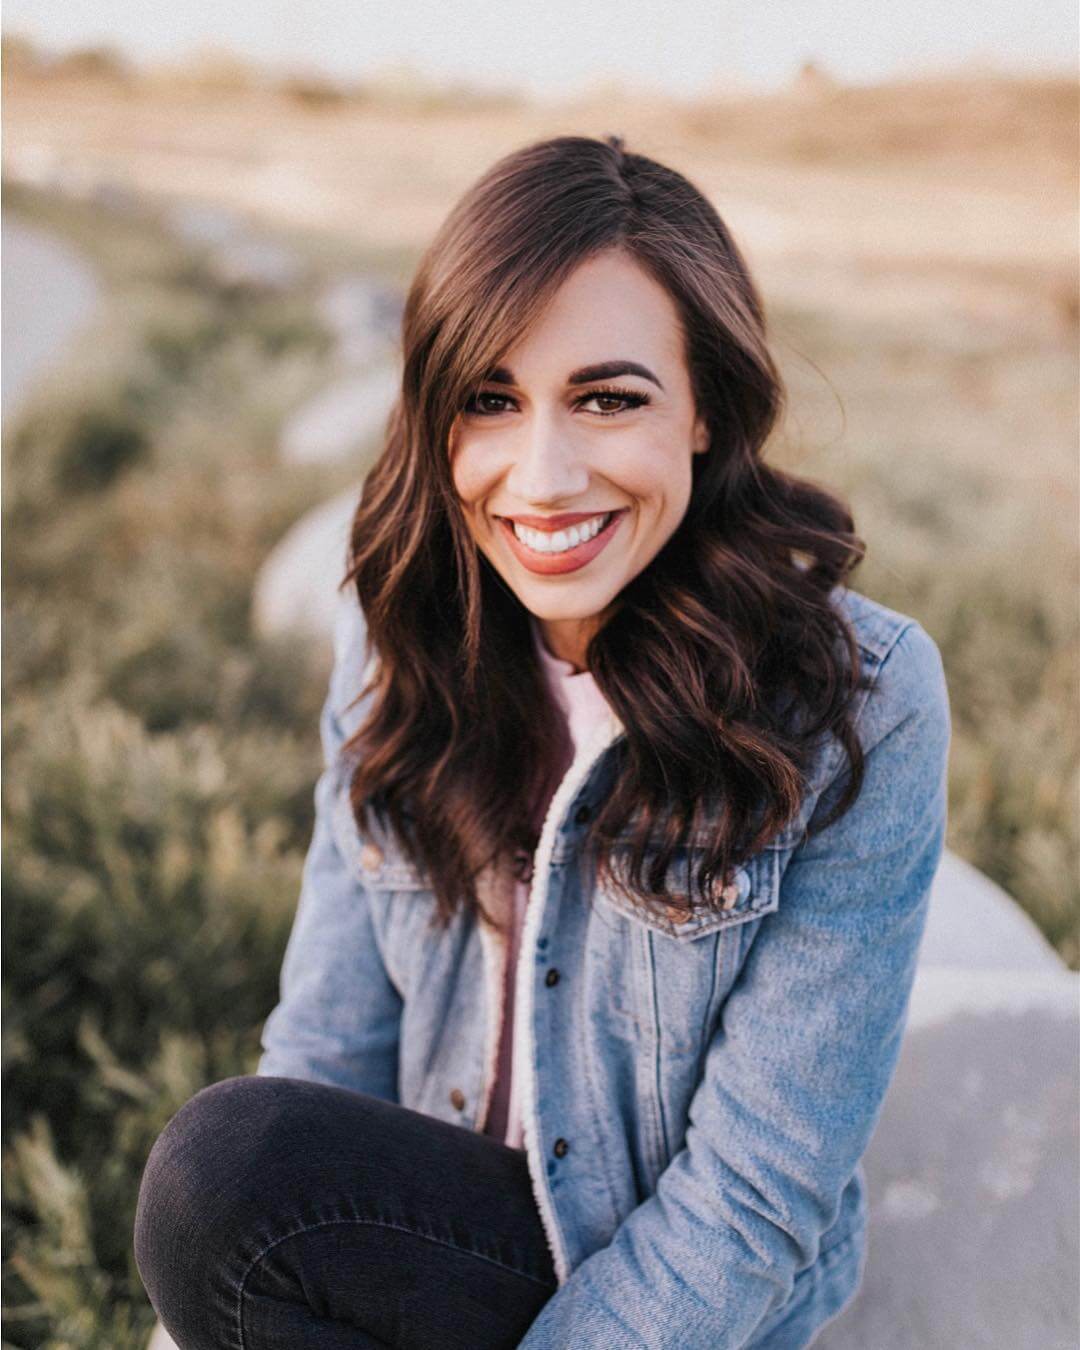 Hot Picture Of Colleen Ballinger Will Hypnotise You With Her